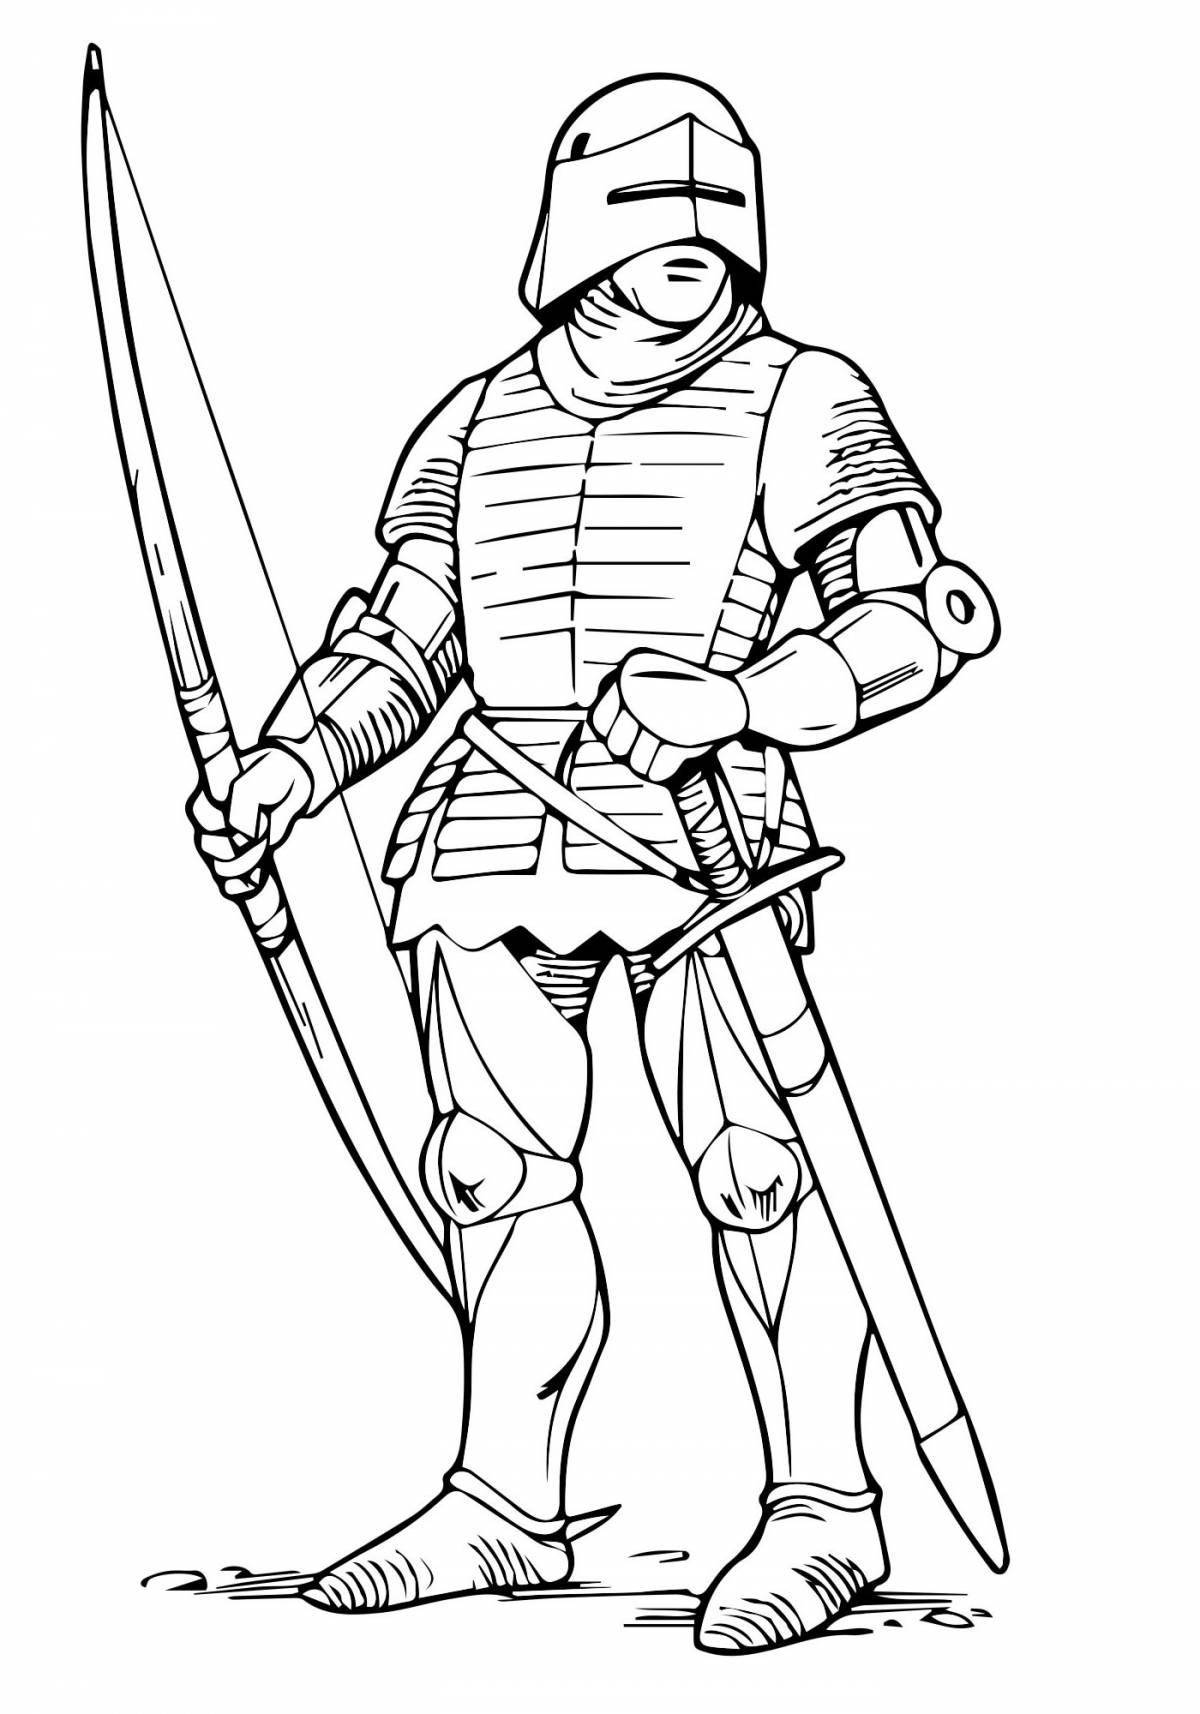 Great knight coloring for kids